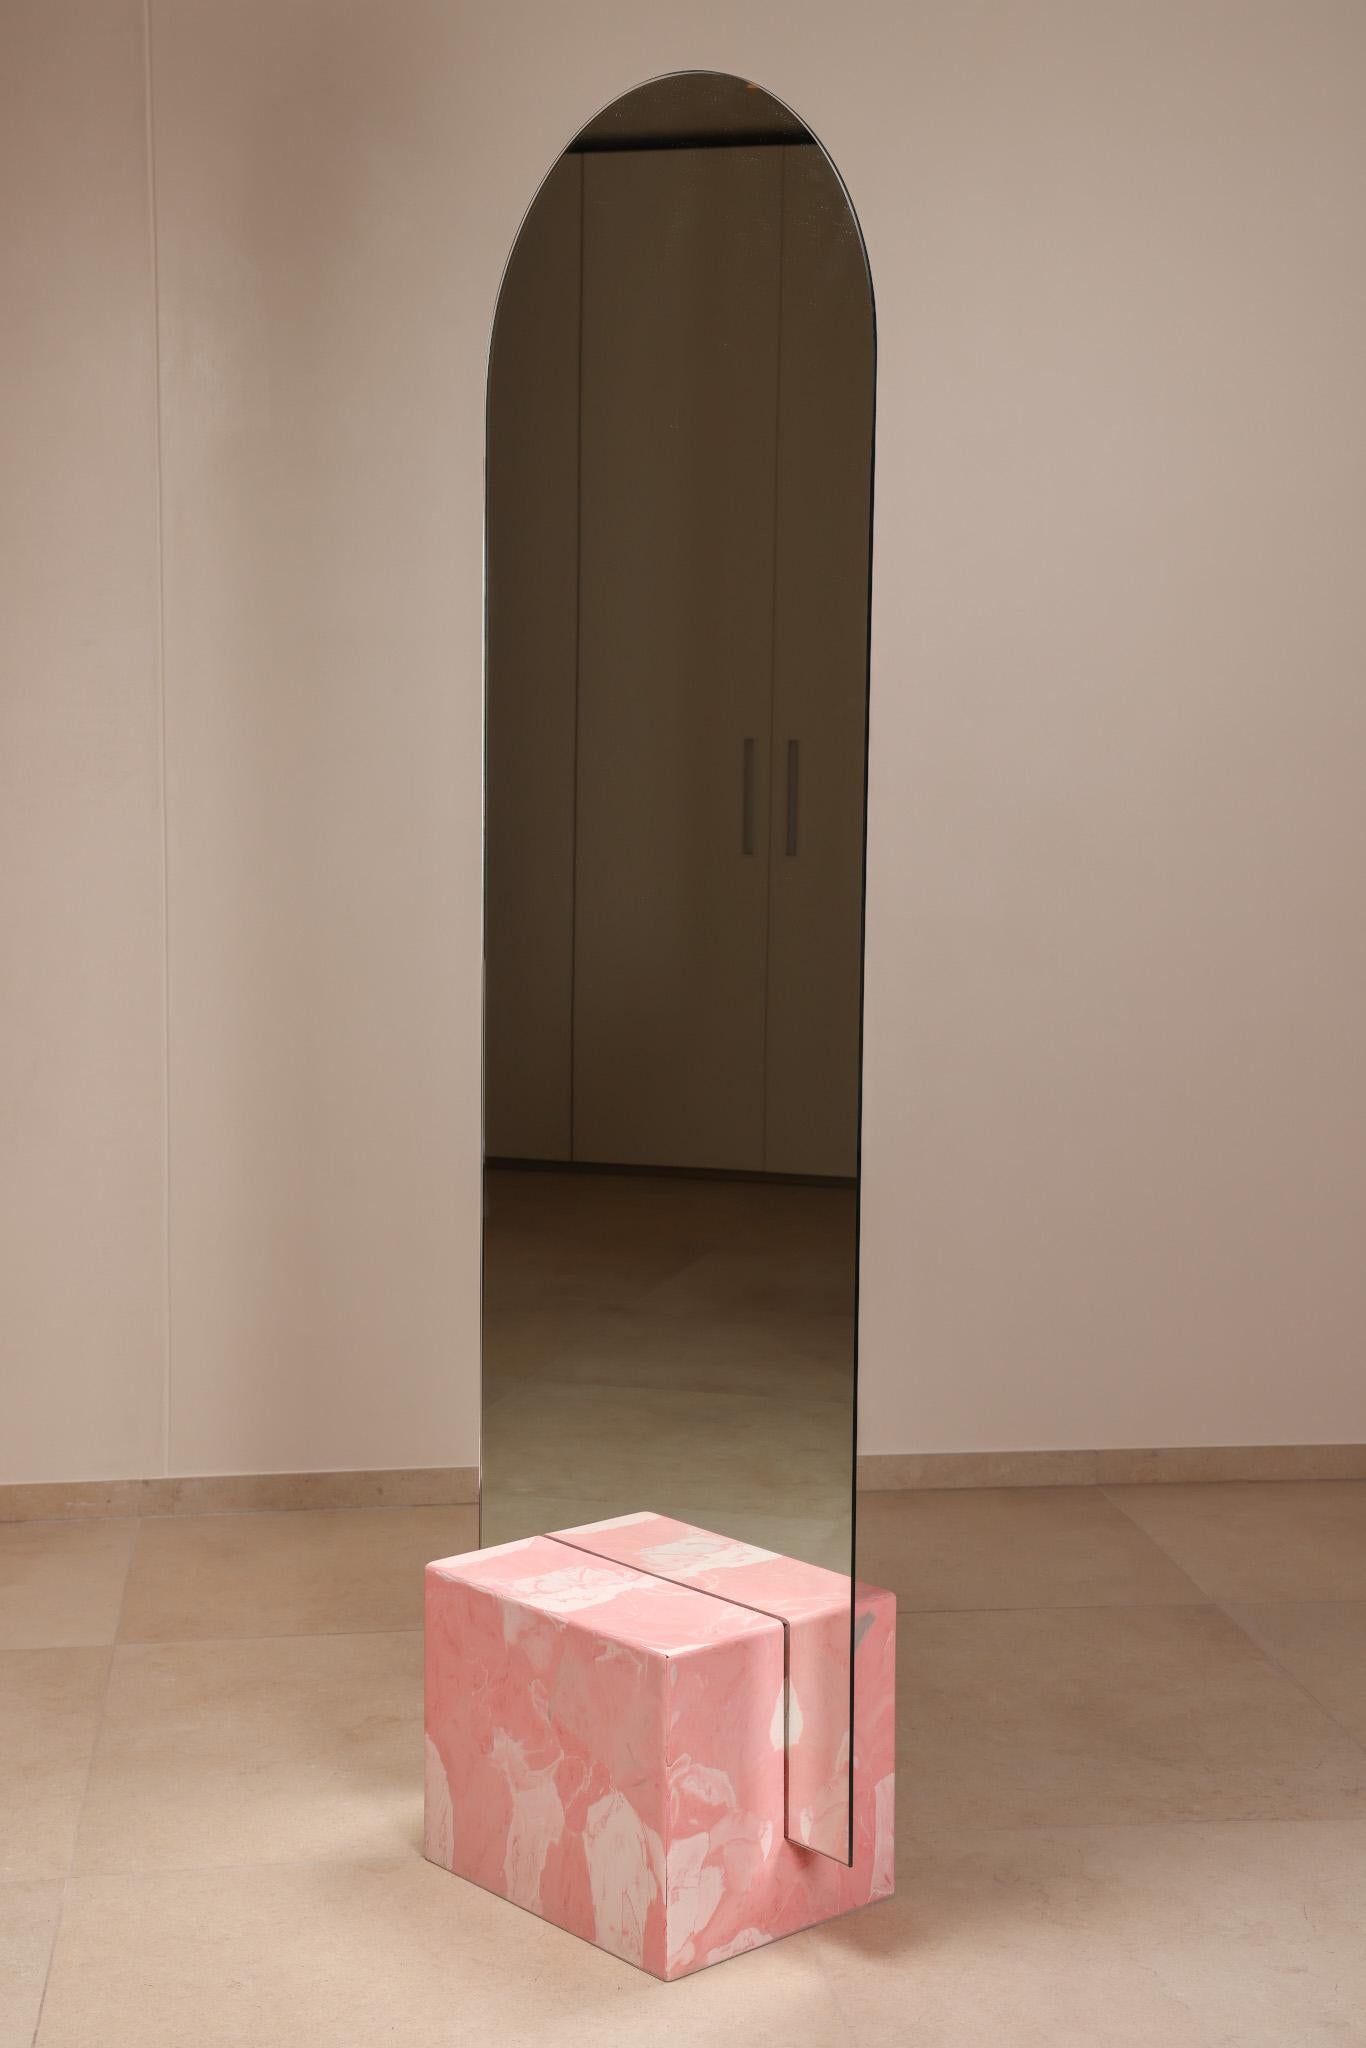 Contemporary Pink Standing Mirror Hand-Crafted from 100% Recycled Plastic by Anqa Studios
With its stone-like bottom and the fragile seeming top part silhouette, the ANQA Moonrise mirror is a modern confluence of both art and function. This